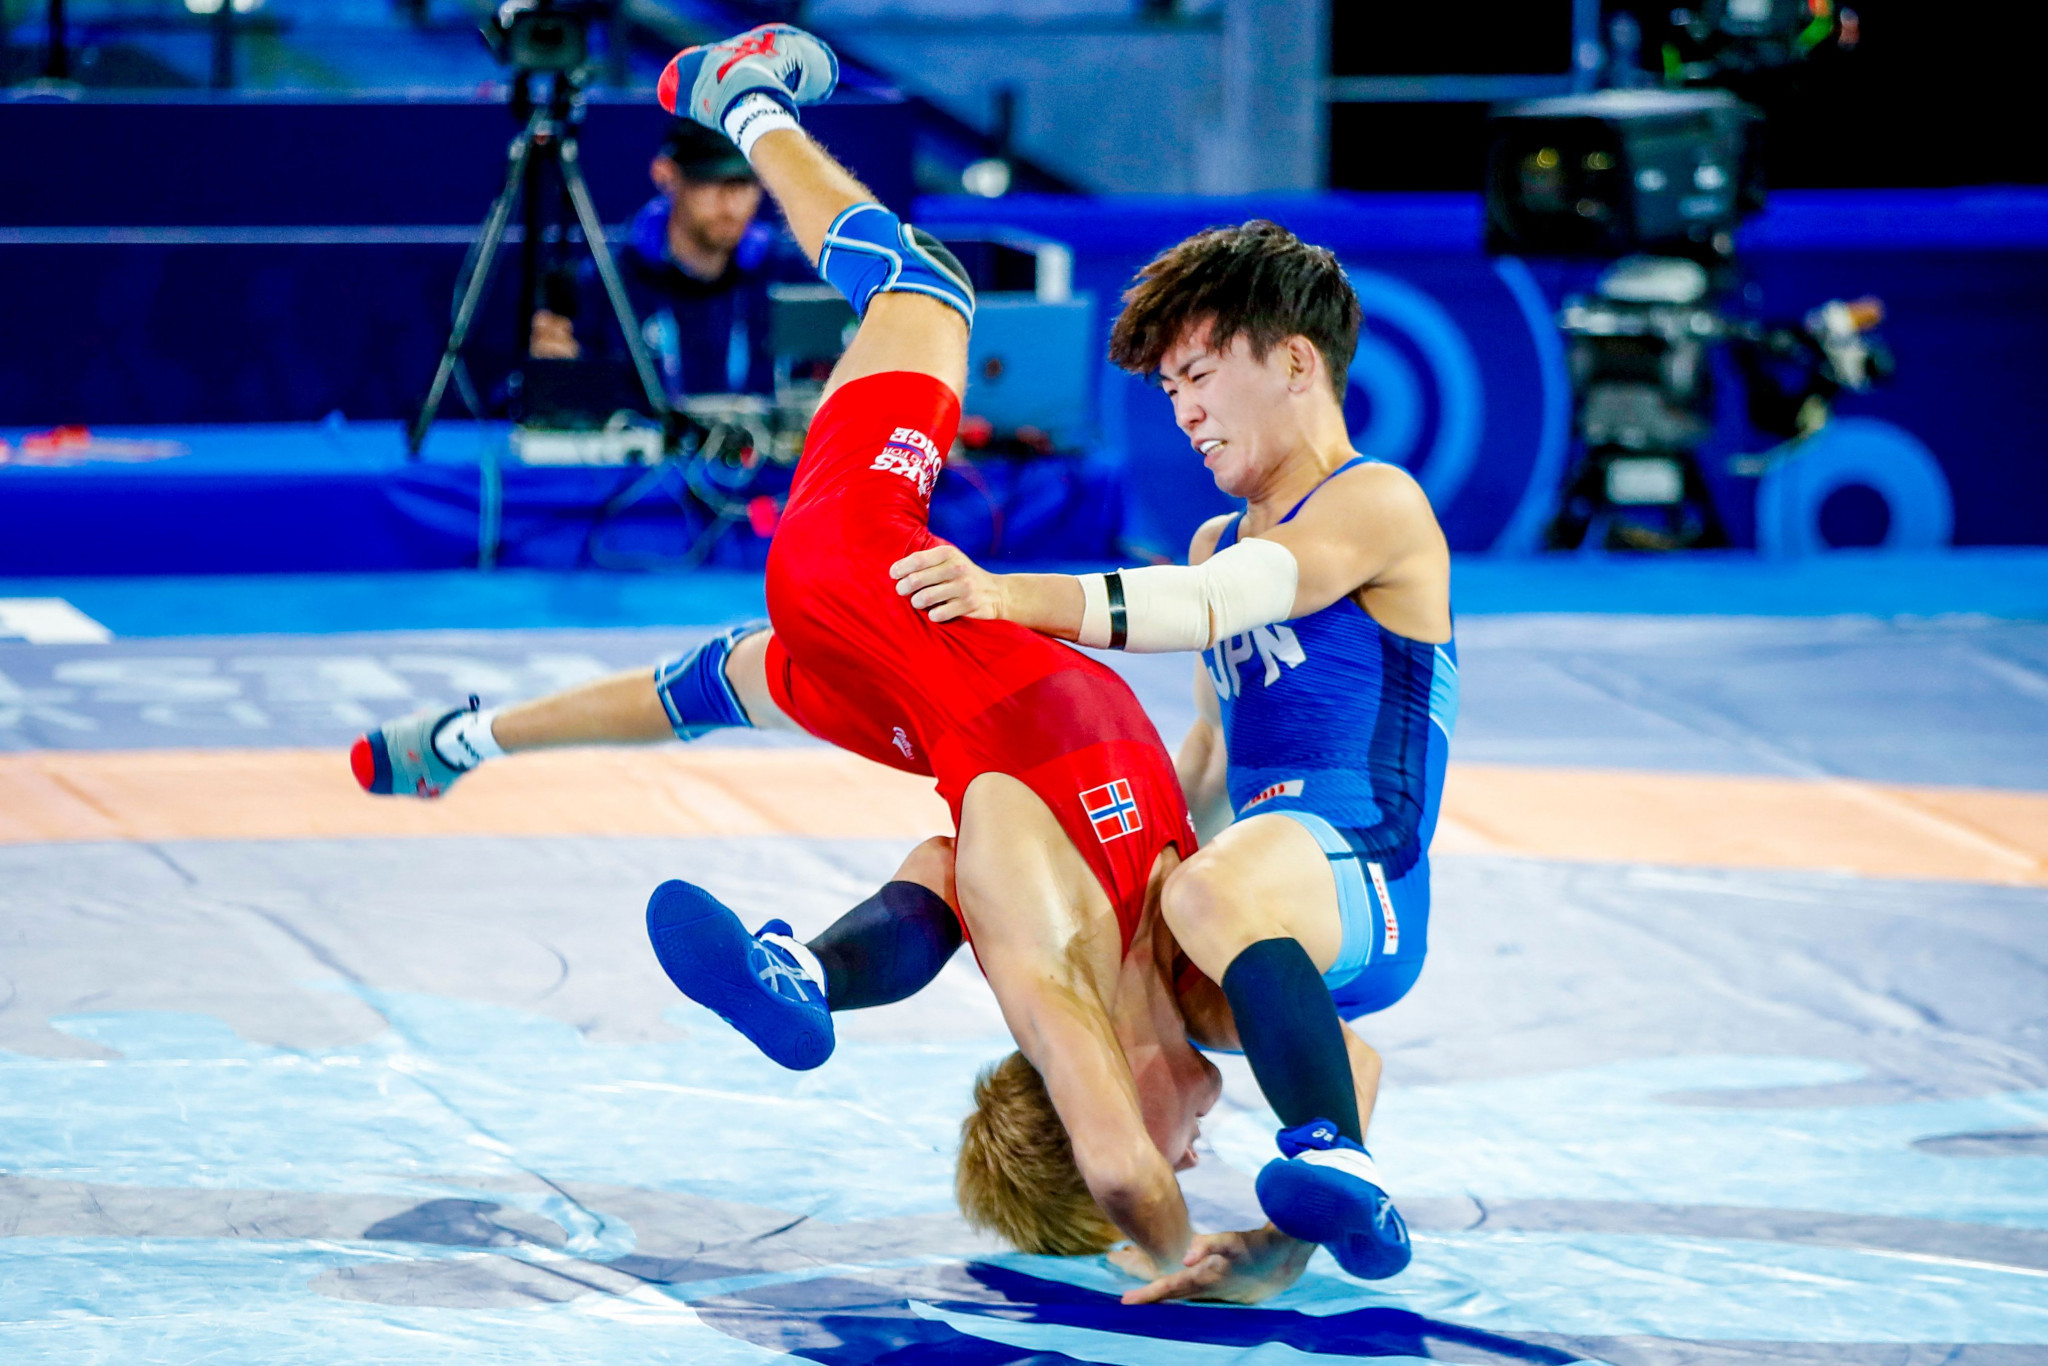 Ken Matsui, right, won the Greco-Roman under-55kg event in Oslo ©Getty Images